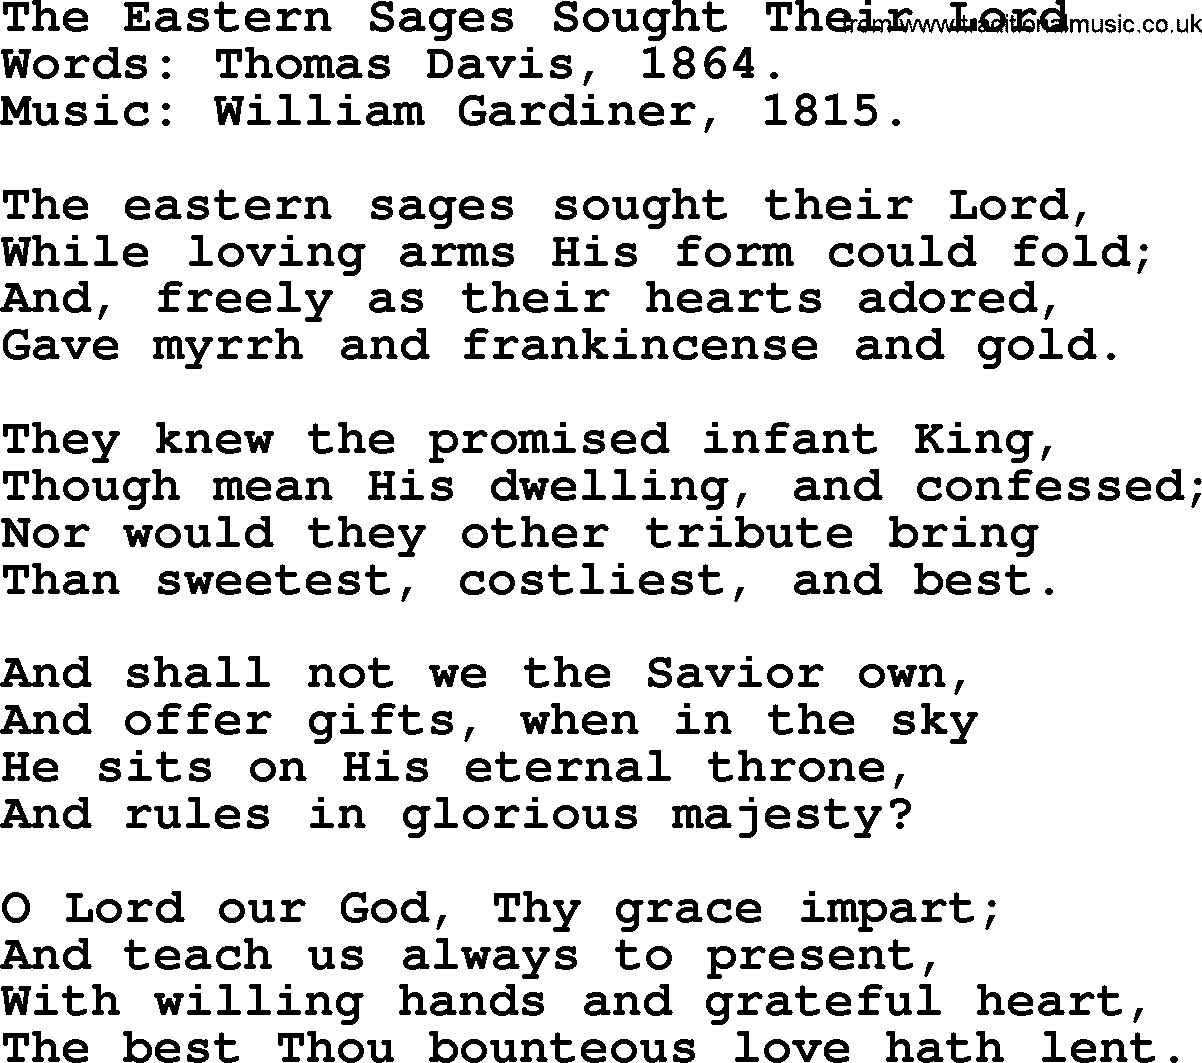 Christmas Hymns, Carols and Songs, title: The Eastern Sages Sought Their Lord, lyrics with PDF